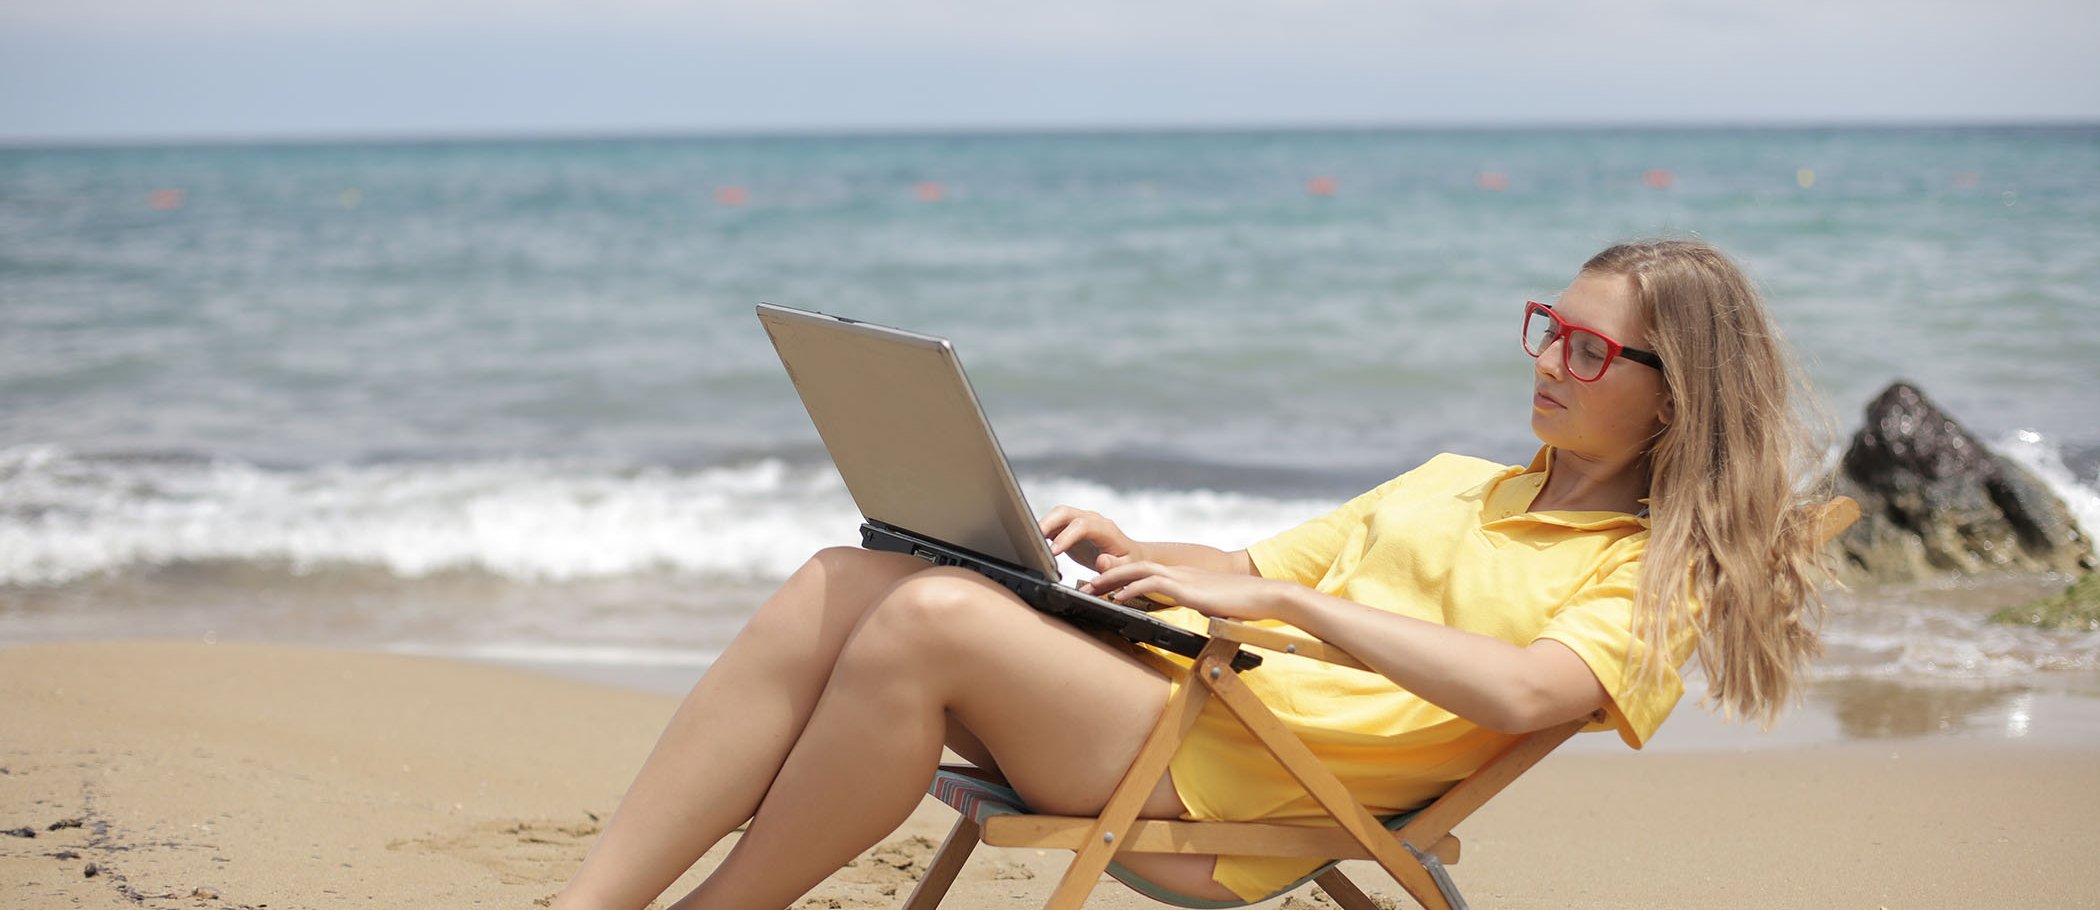 A girl using a laptop at the beach